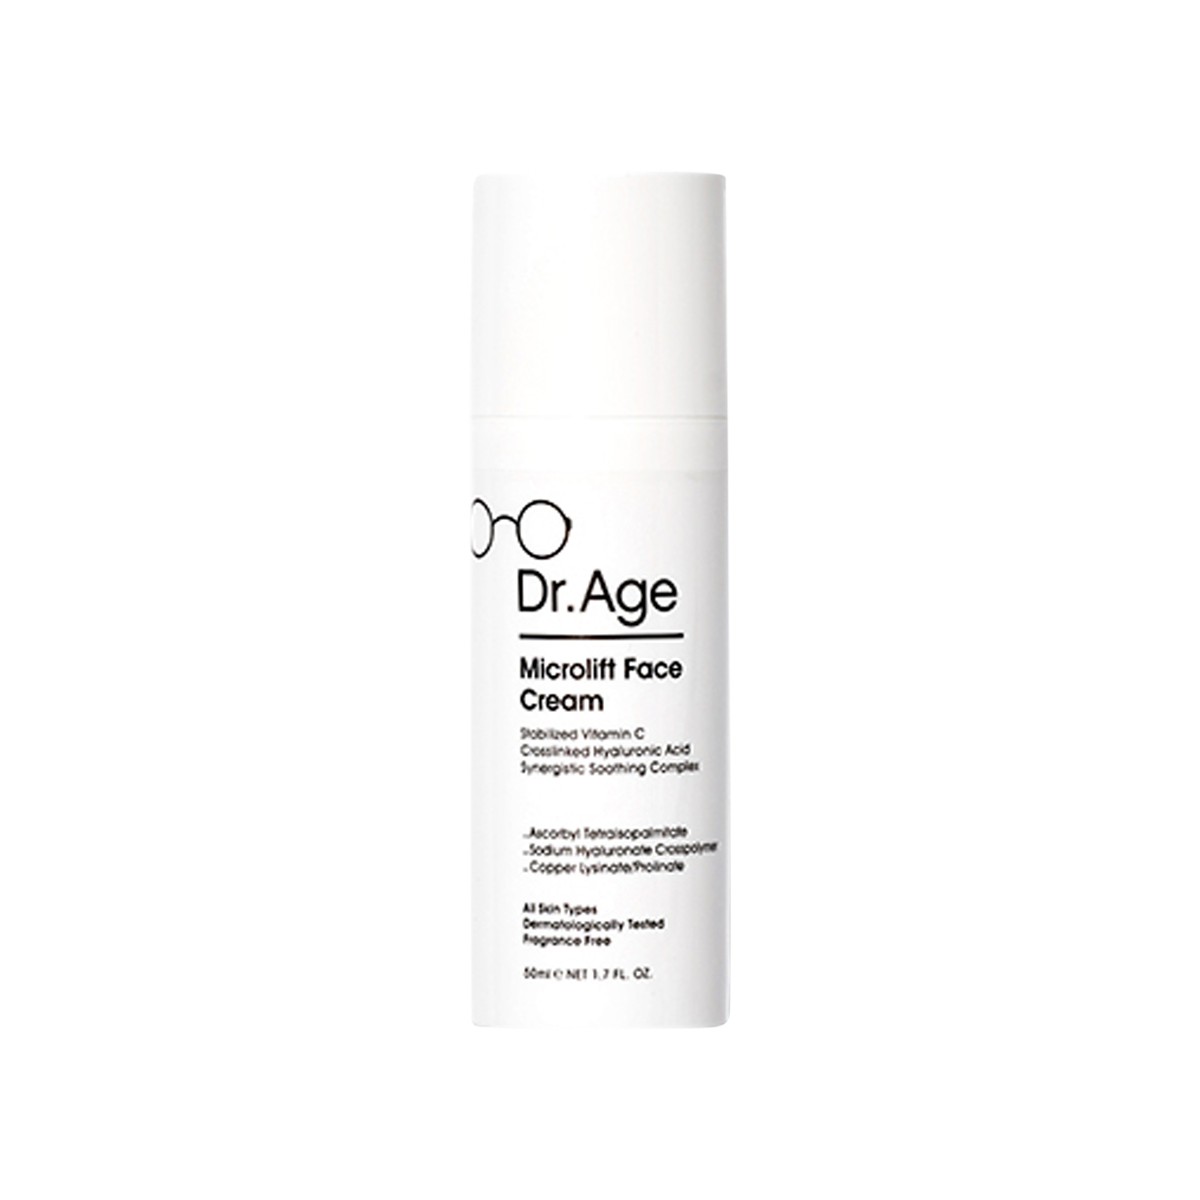 Dr. Age - Microlift Face Cream